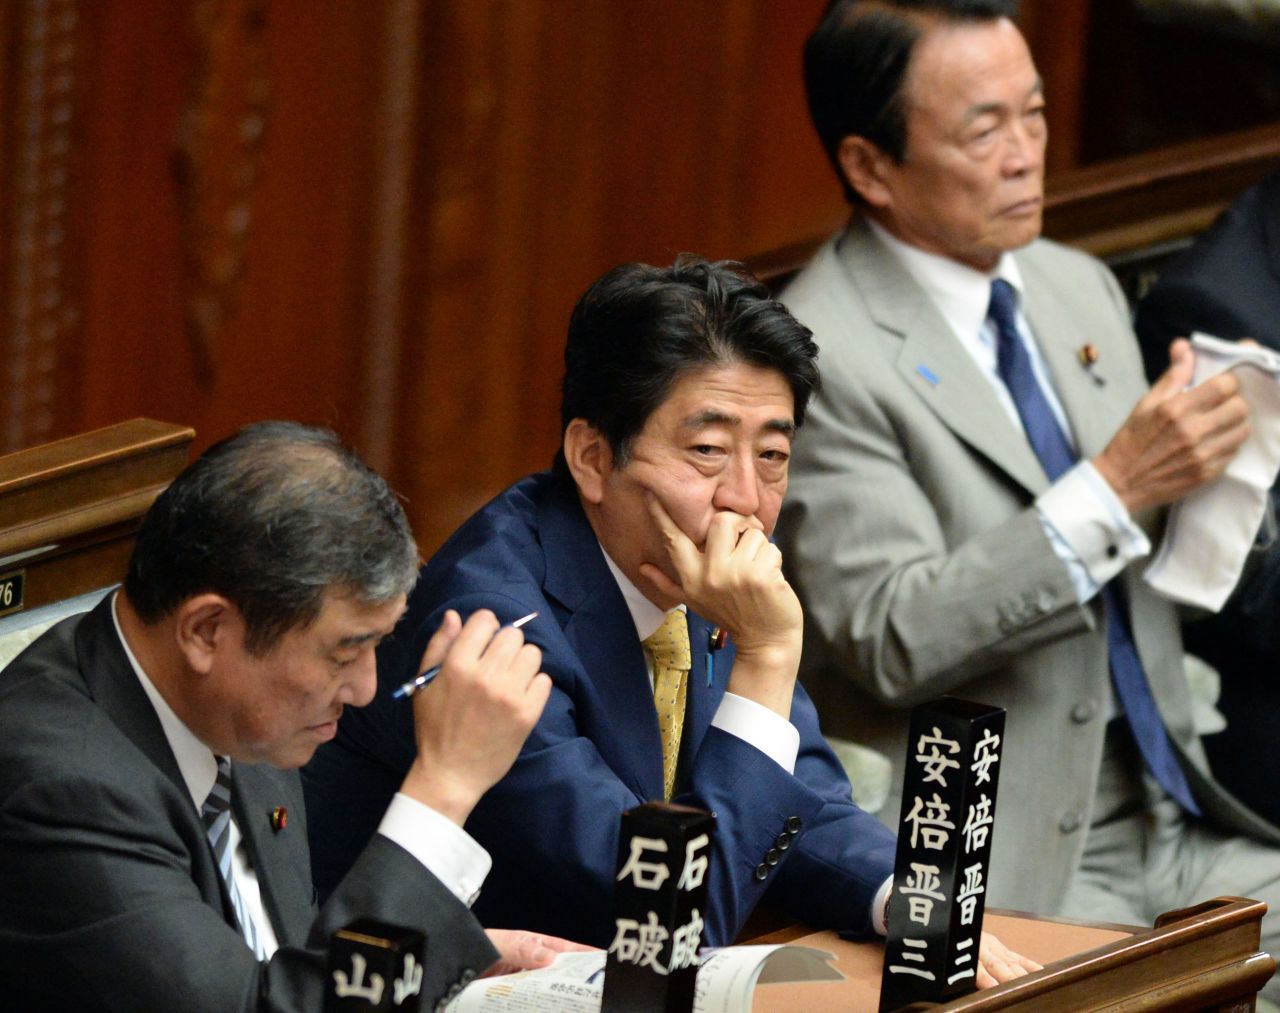 Abe listens to opposition lawmakers statements in Tokyo in 2015. Japan's ruling coalition rammed through a series of controversial security bills, marking the most significant overturn of the nation's "purely defensive" defense posture.